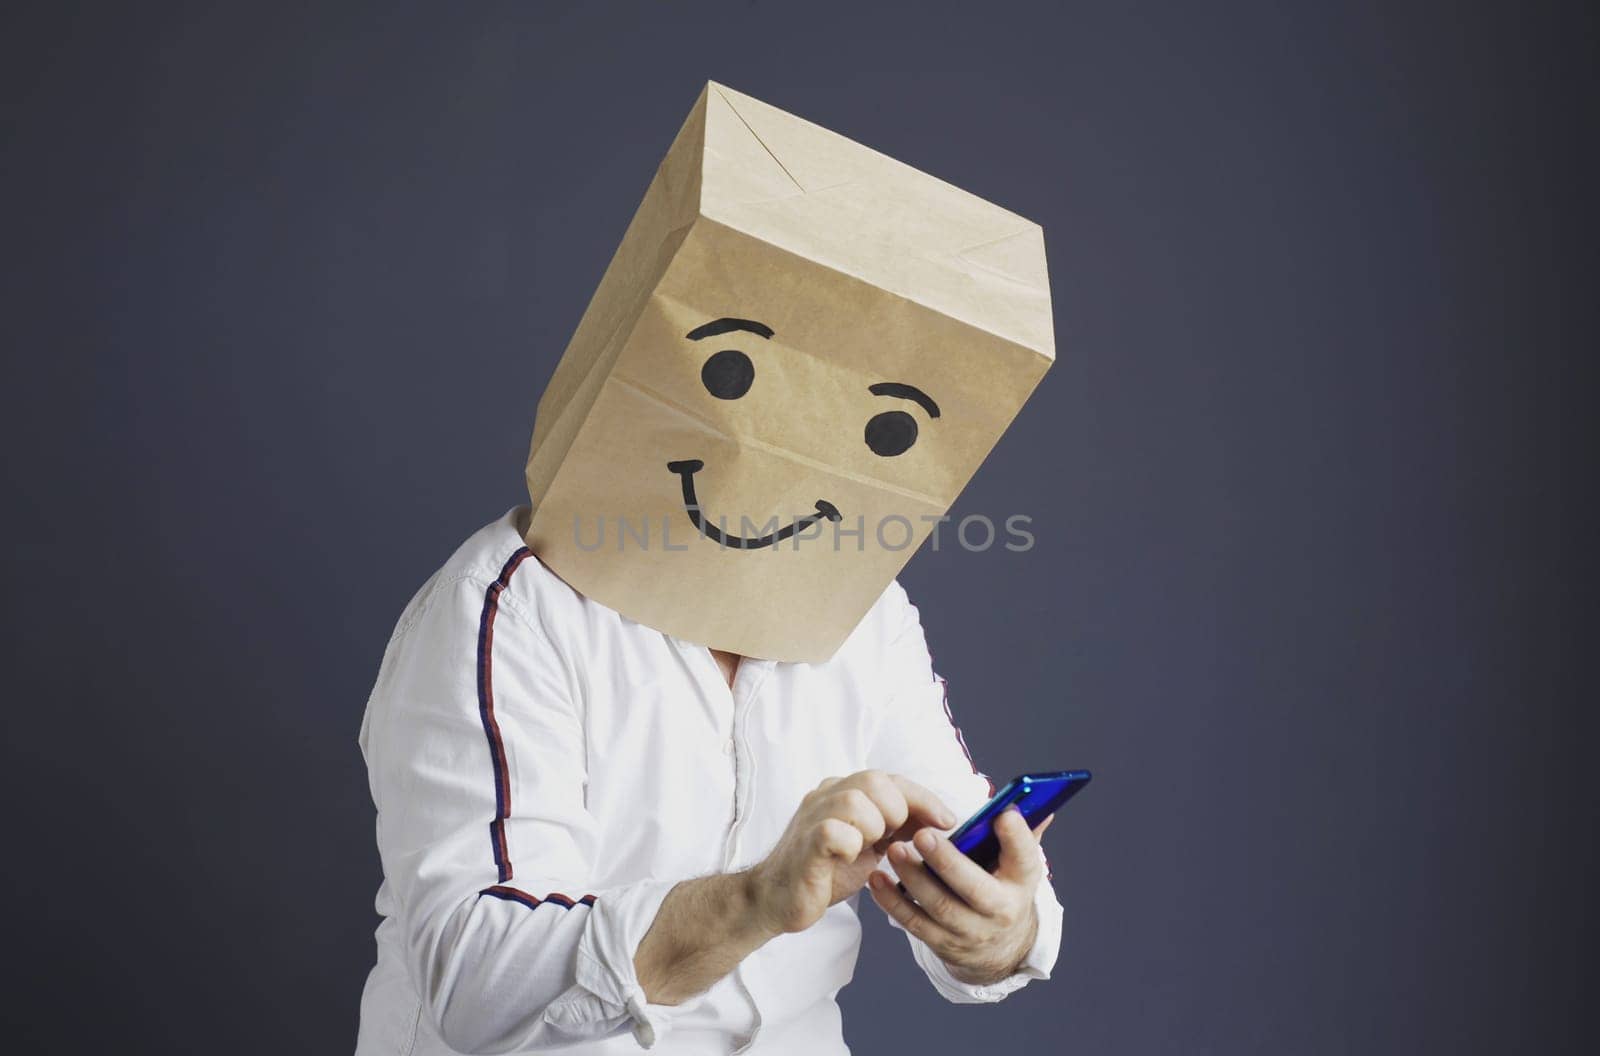 A man in a white shirt with a paper bag on his head, with a smiley face drawn, writes a message and takes a selfie on a smartphone.